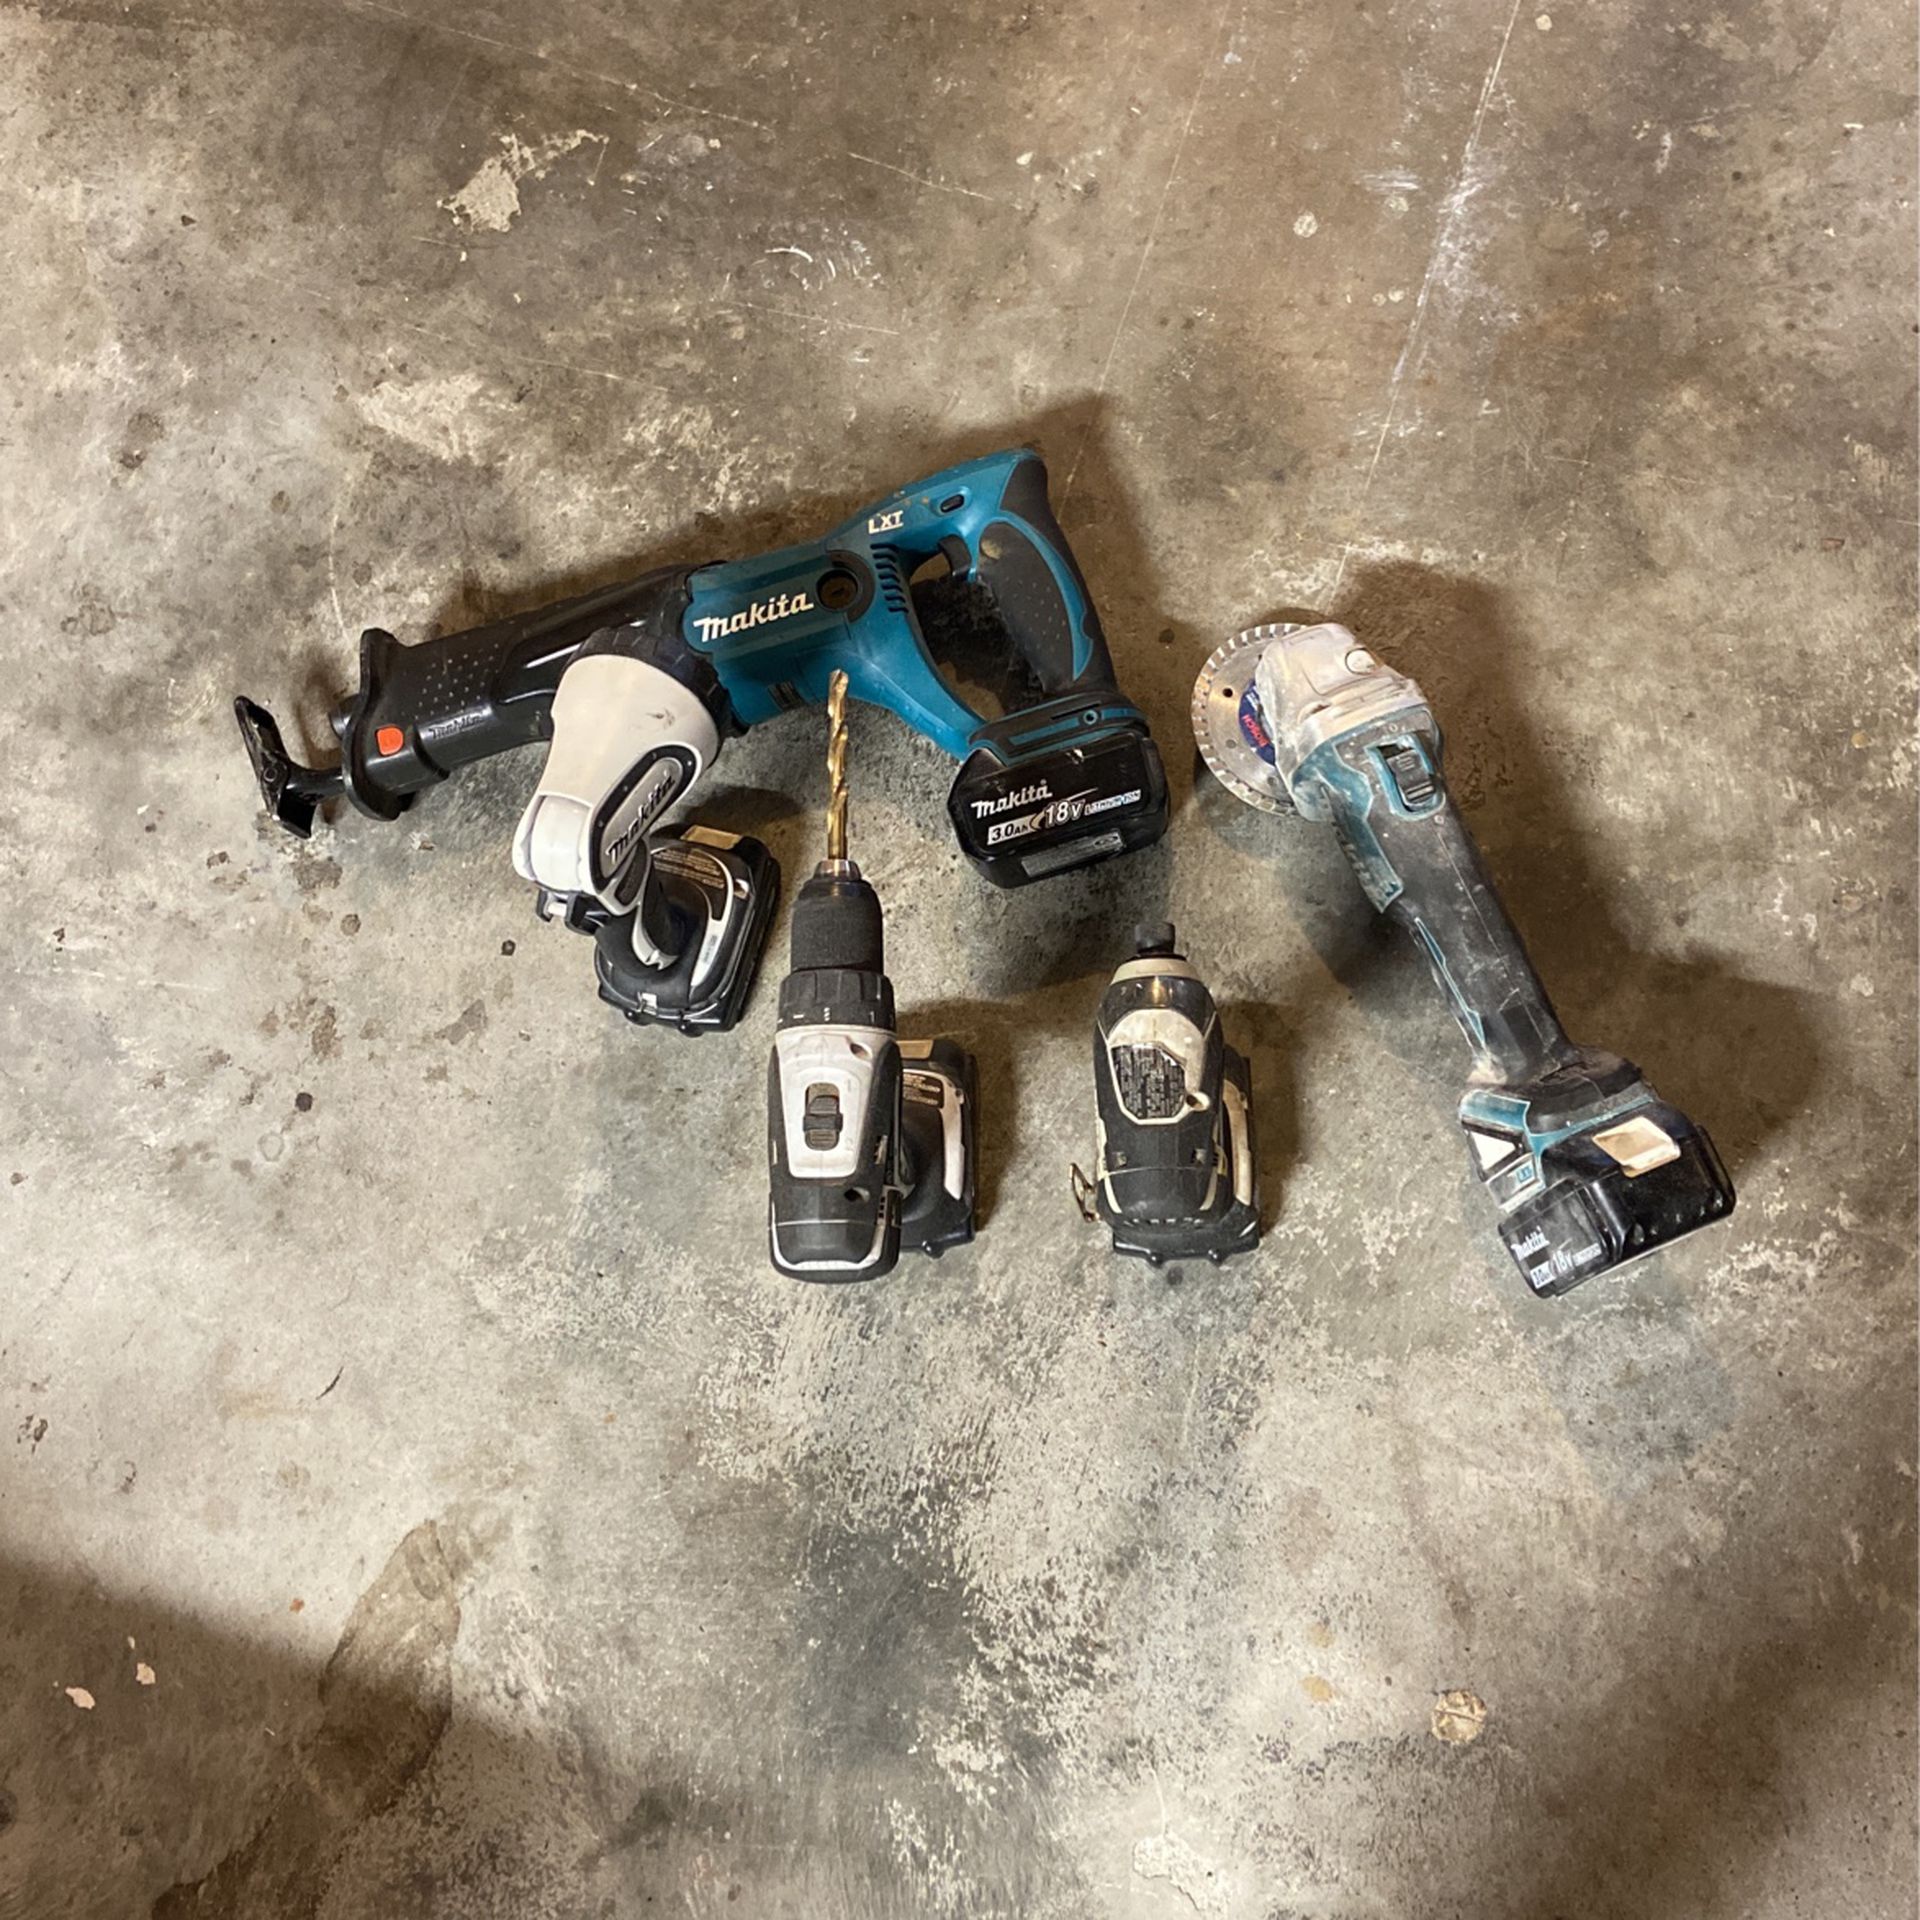 Makita cordless tools with batteries and charger